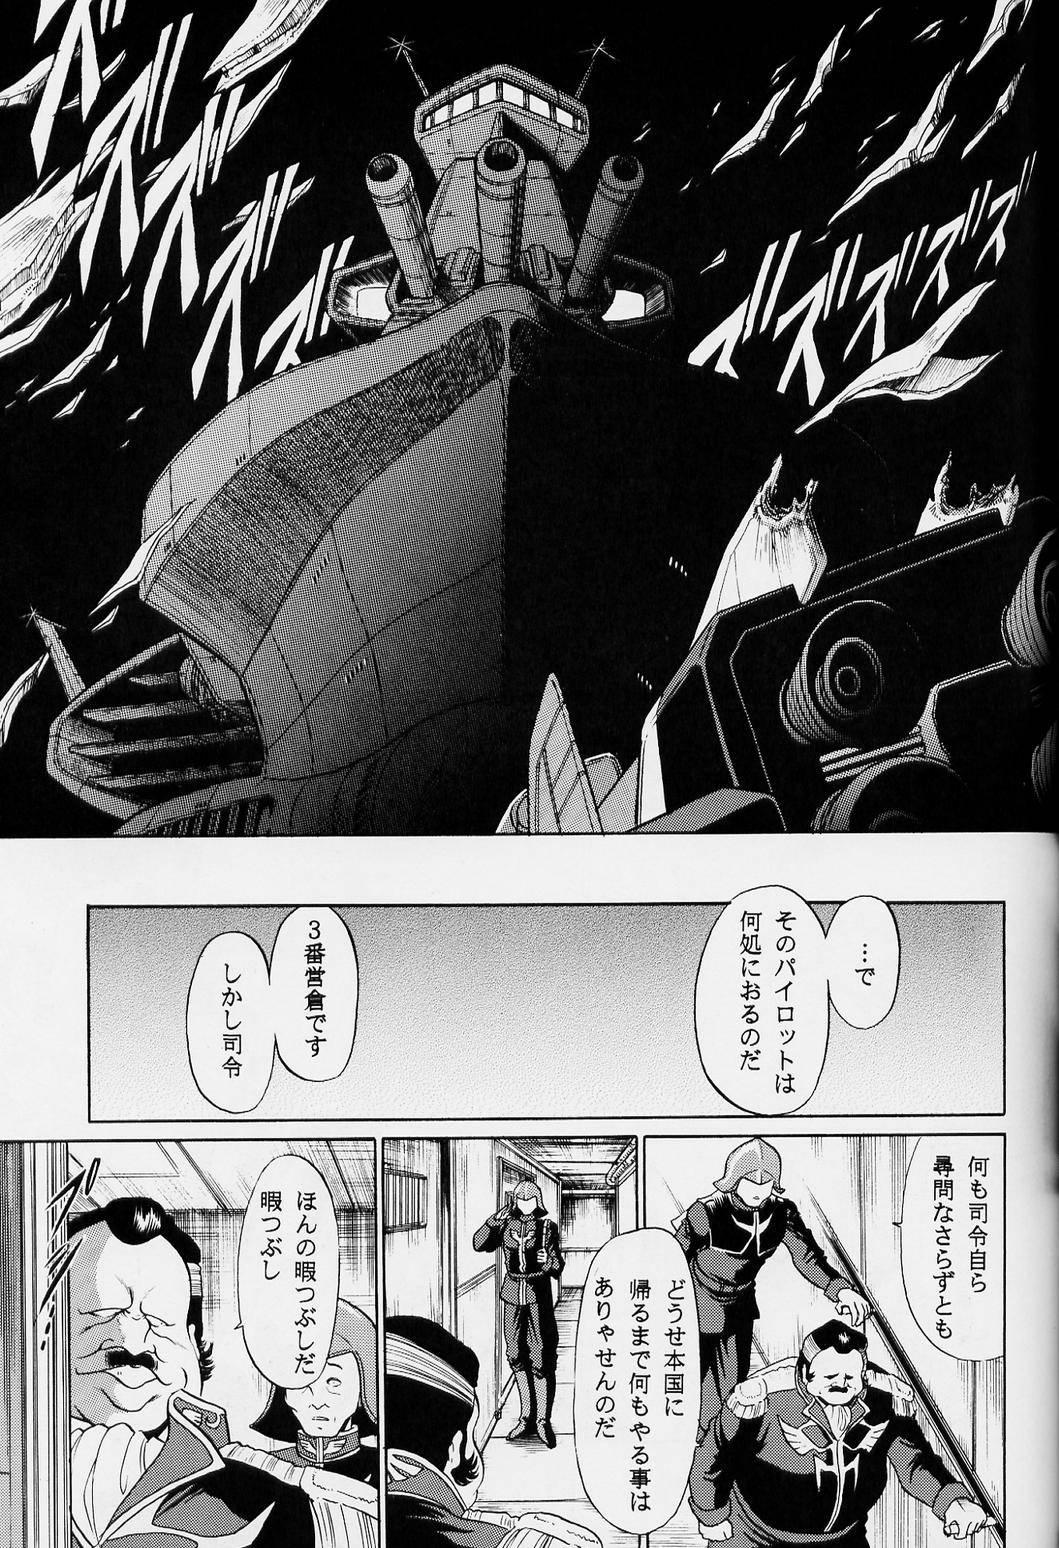 Pounded G - Mobile suit gundam Beach - Page 7